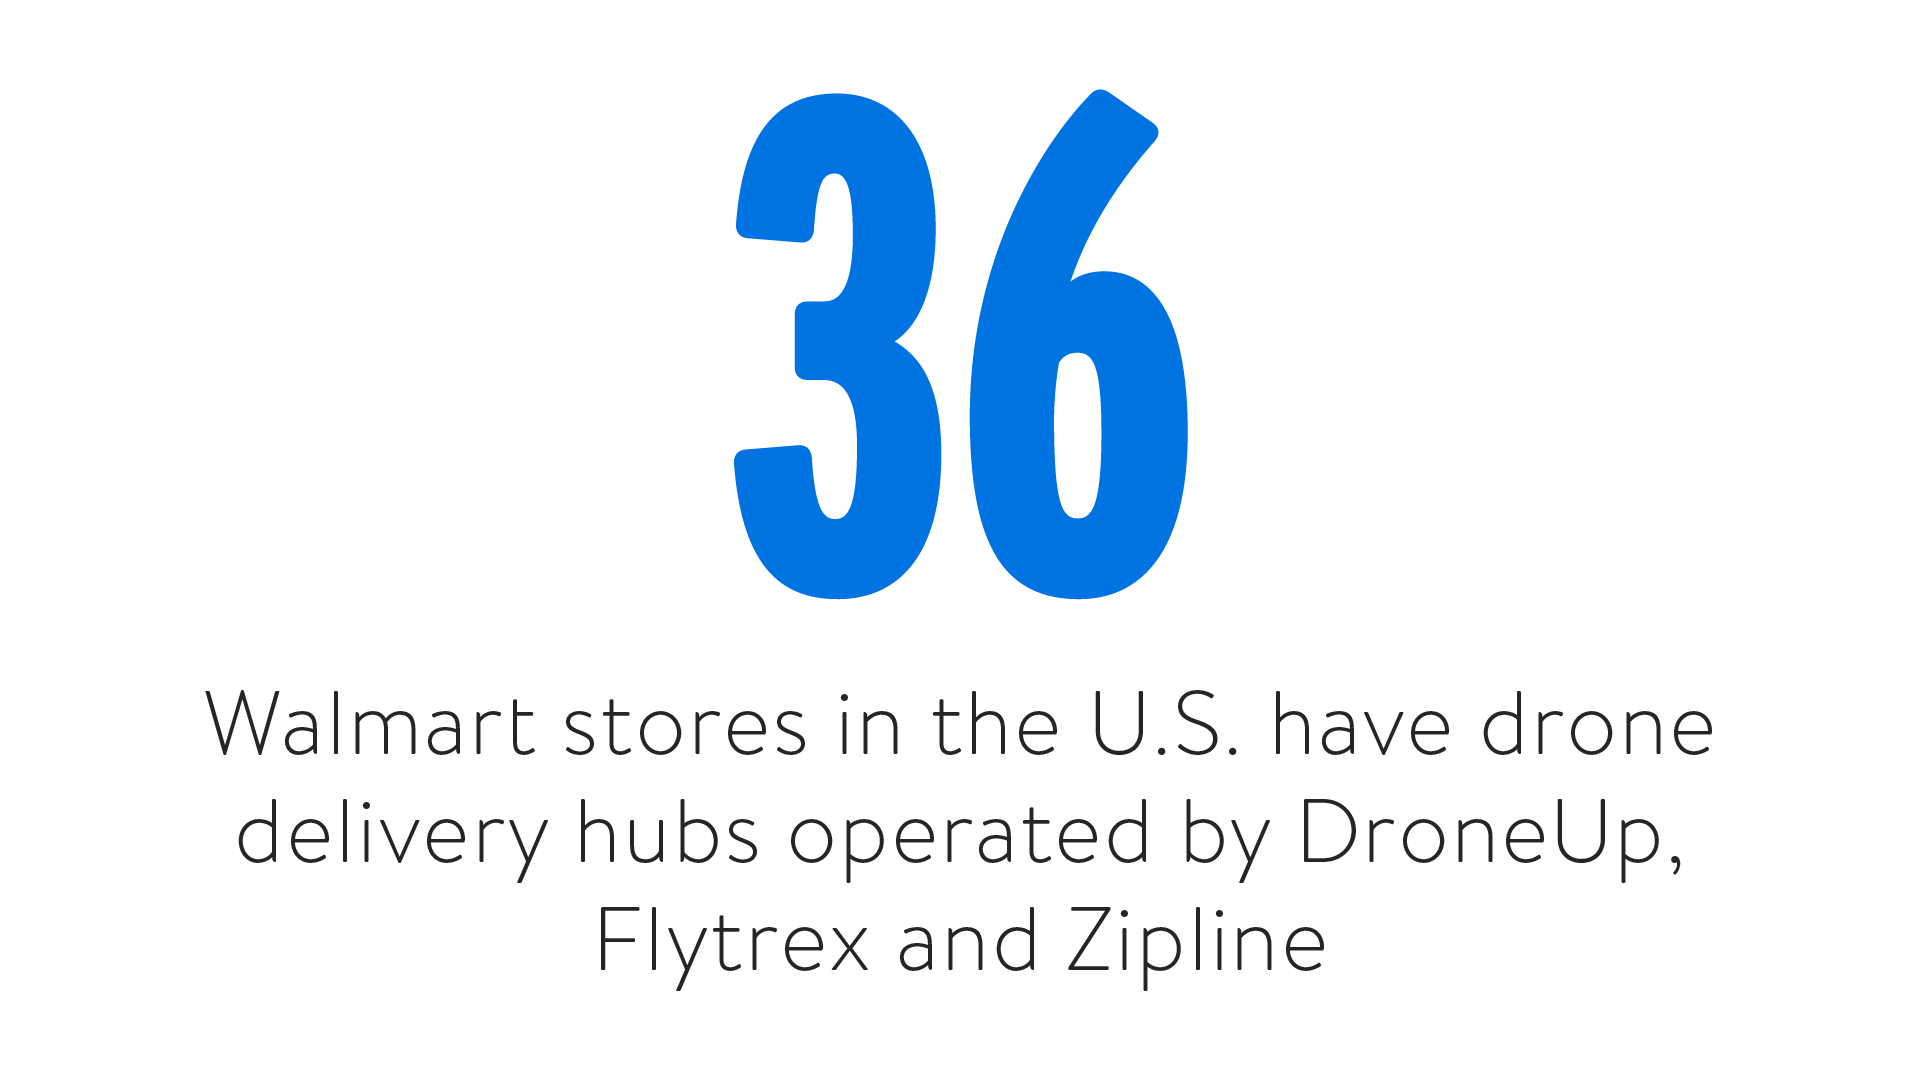 36 Walmart stores in the U.S. have drone delivery hubs operated by DroneUp, FlyTrex and Zipline